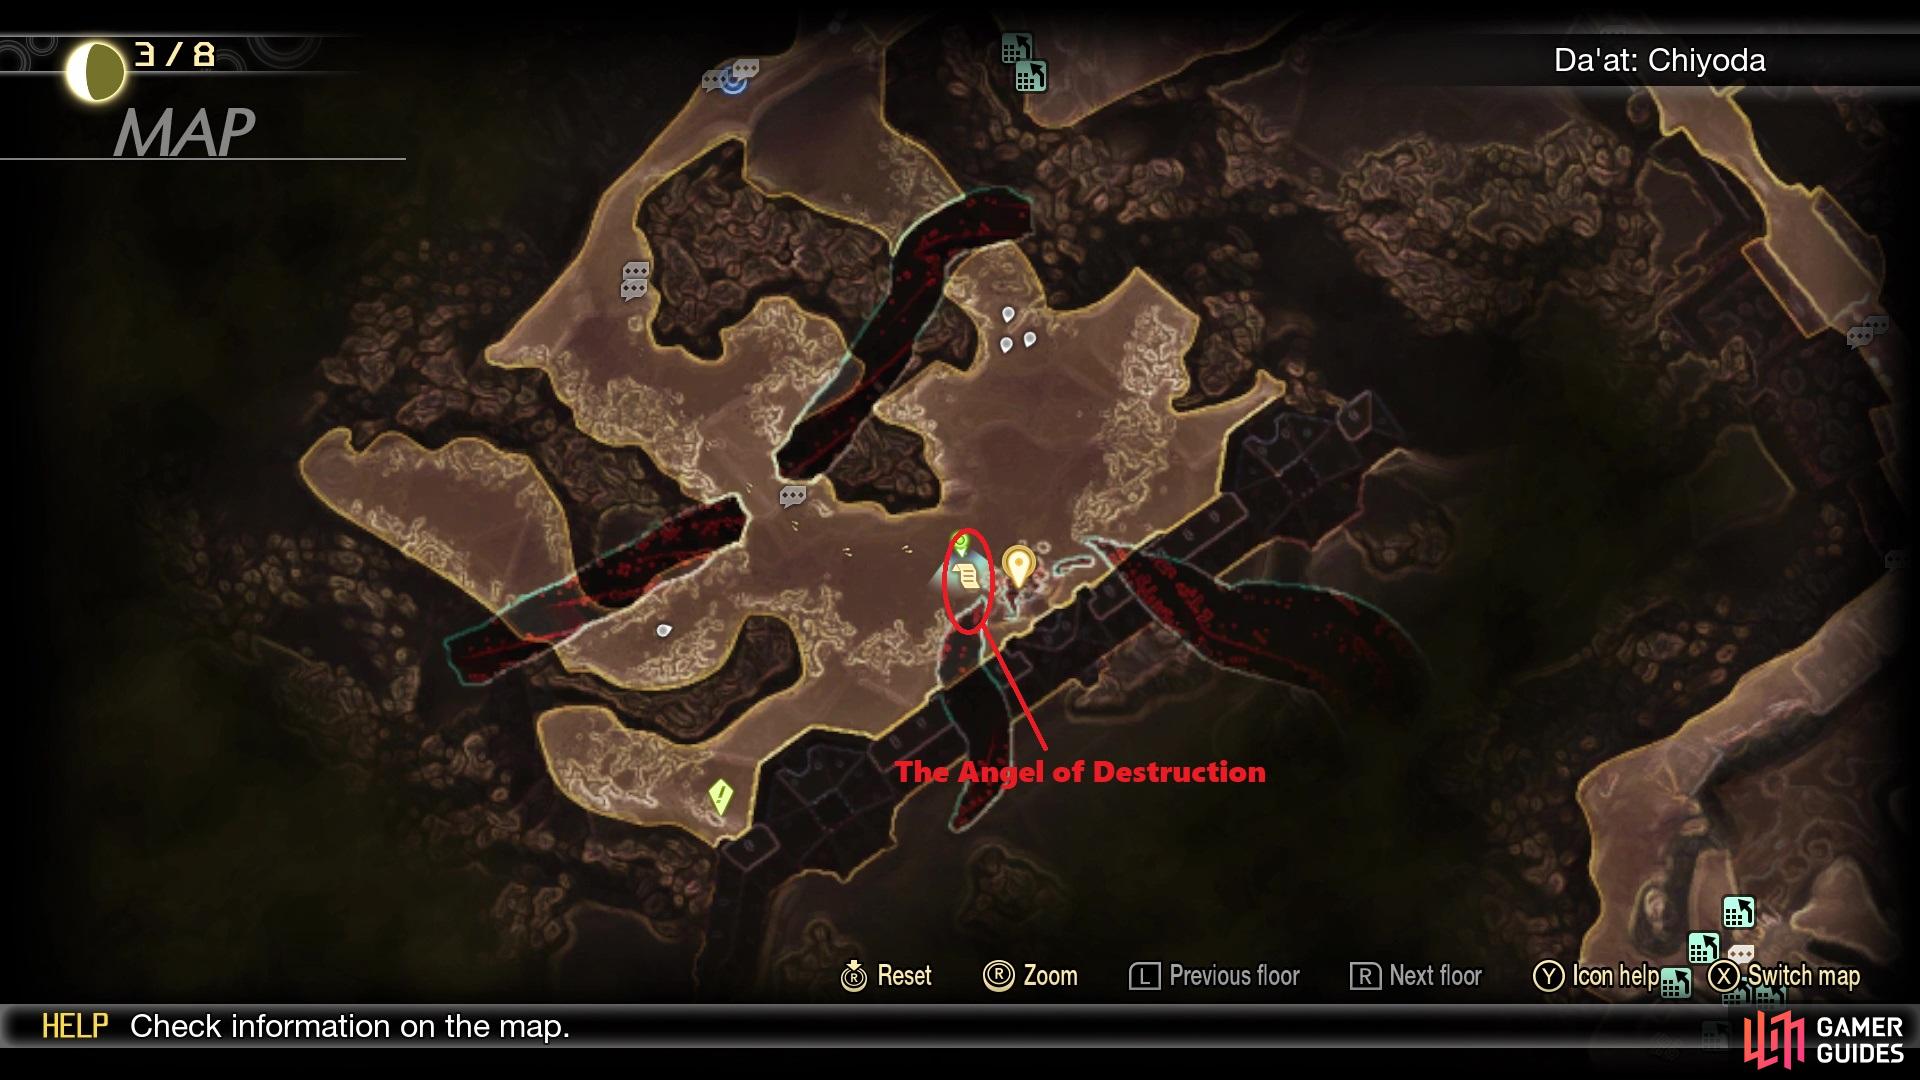 Questgiver’s location on the map